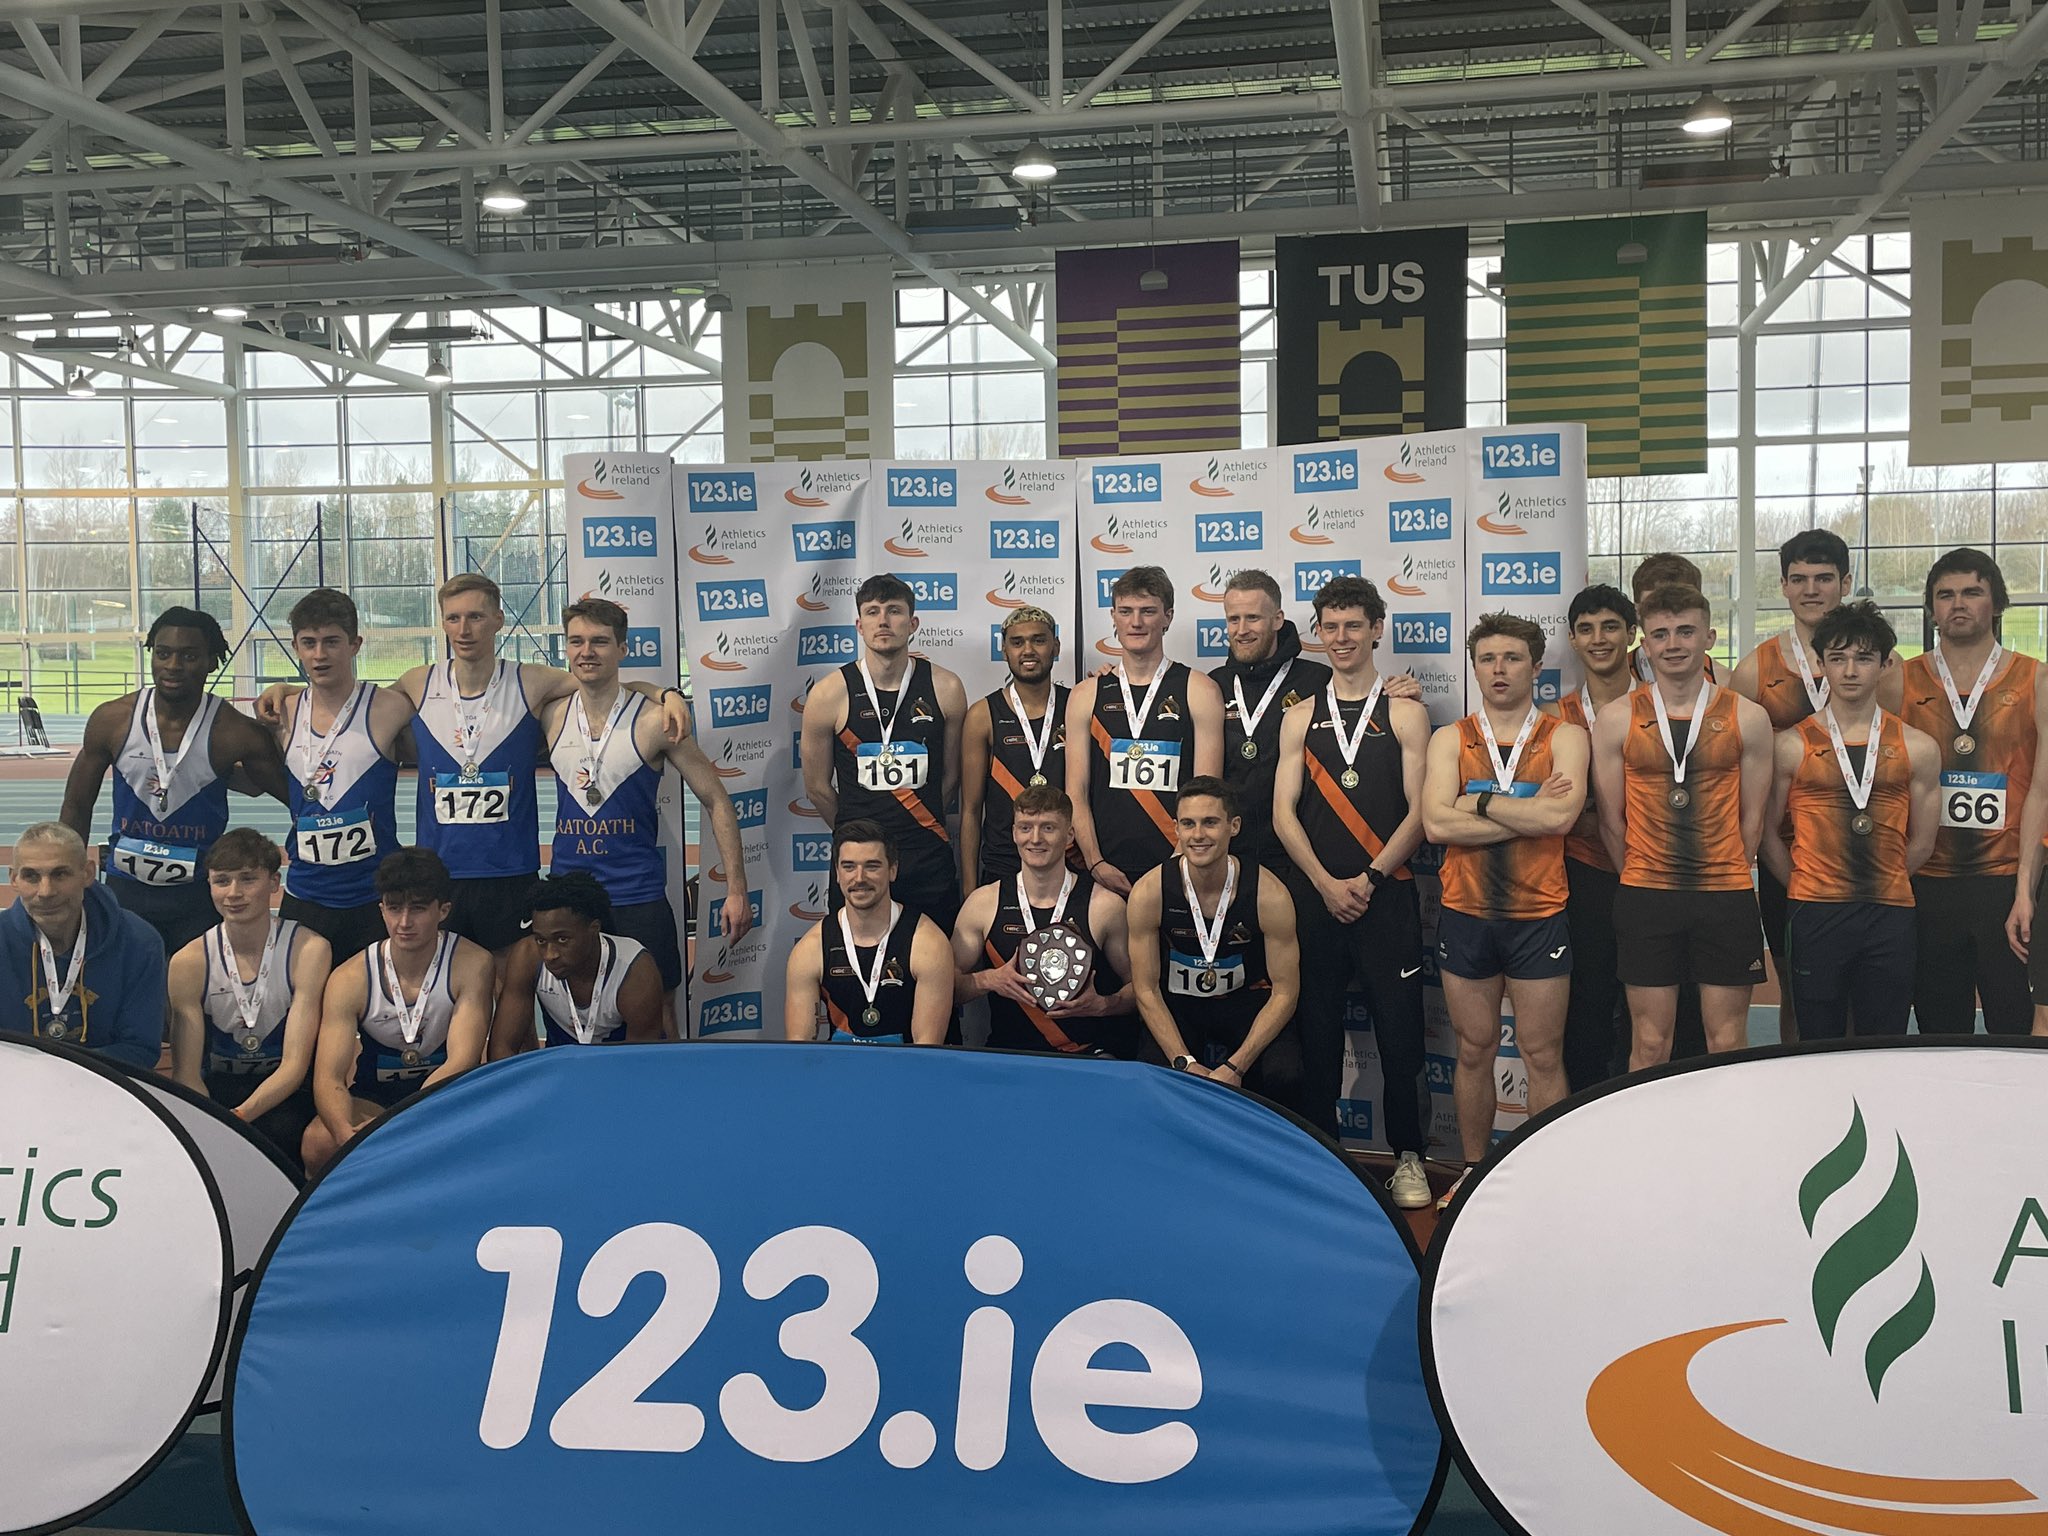 DSD AND CLONLIFFE REIGN SUPREME IN ATHLONE